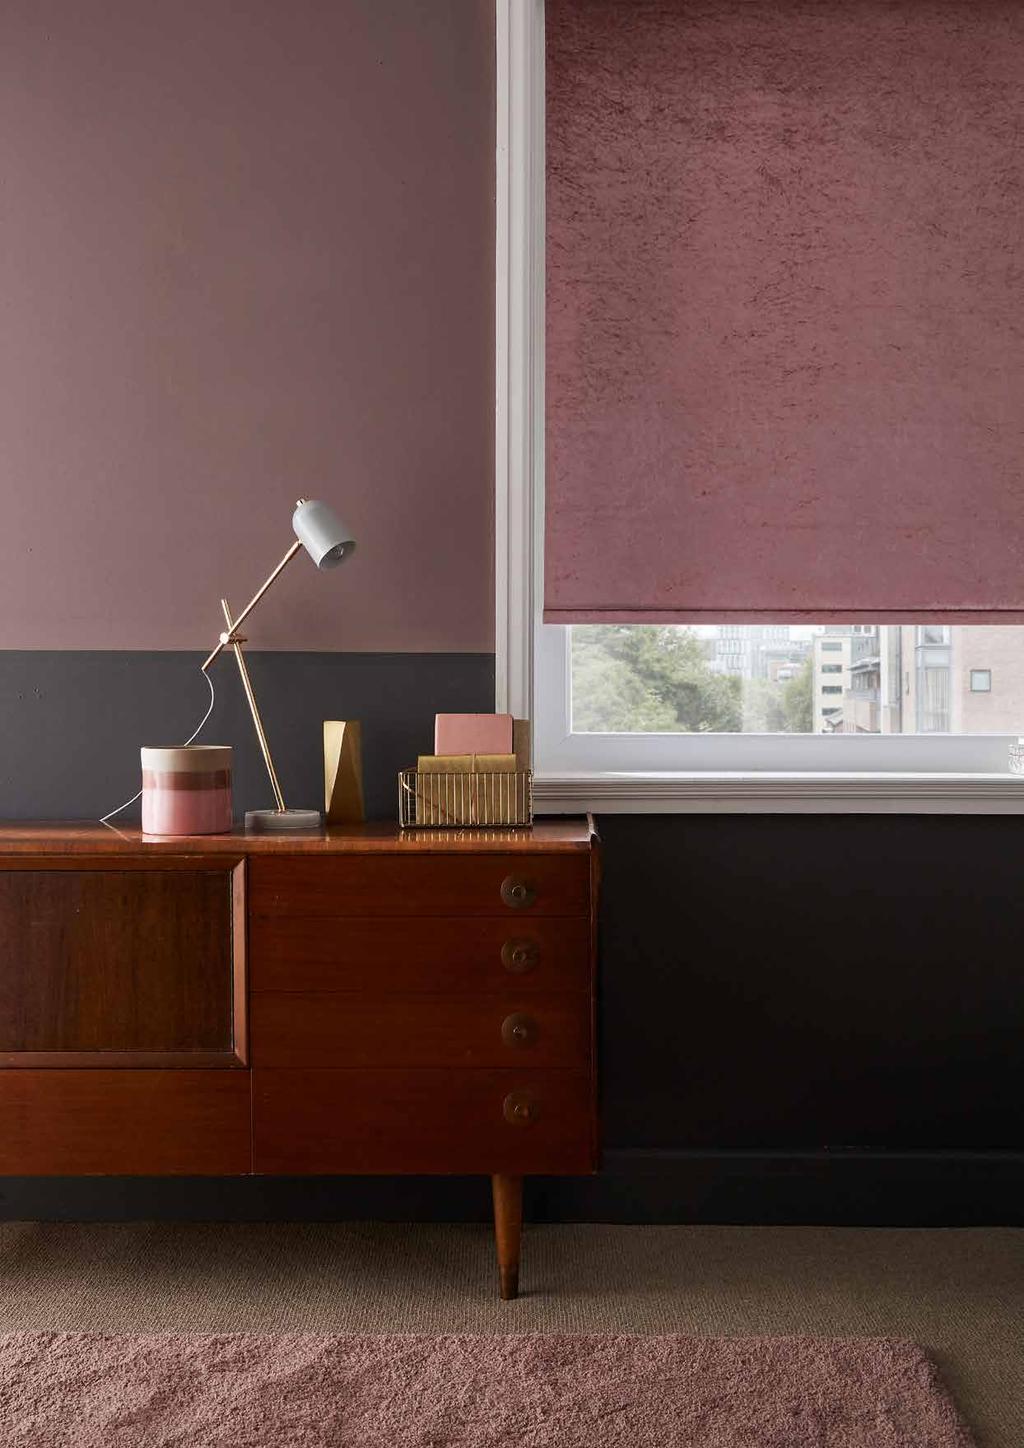 Rollers Our huge Roller blind range has a stunning mix of sheer, blackout, plain, printed and woven fabrics for you to choose from.